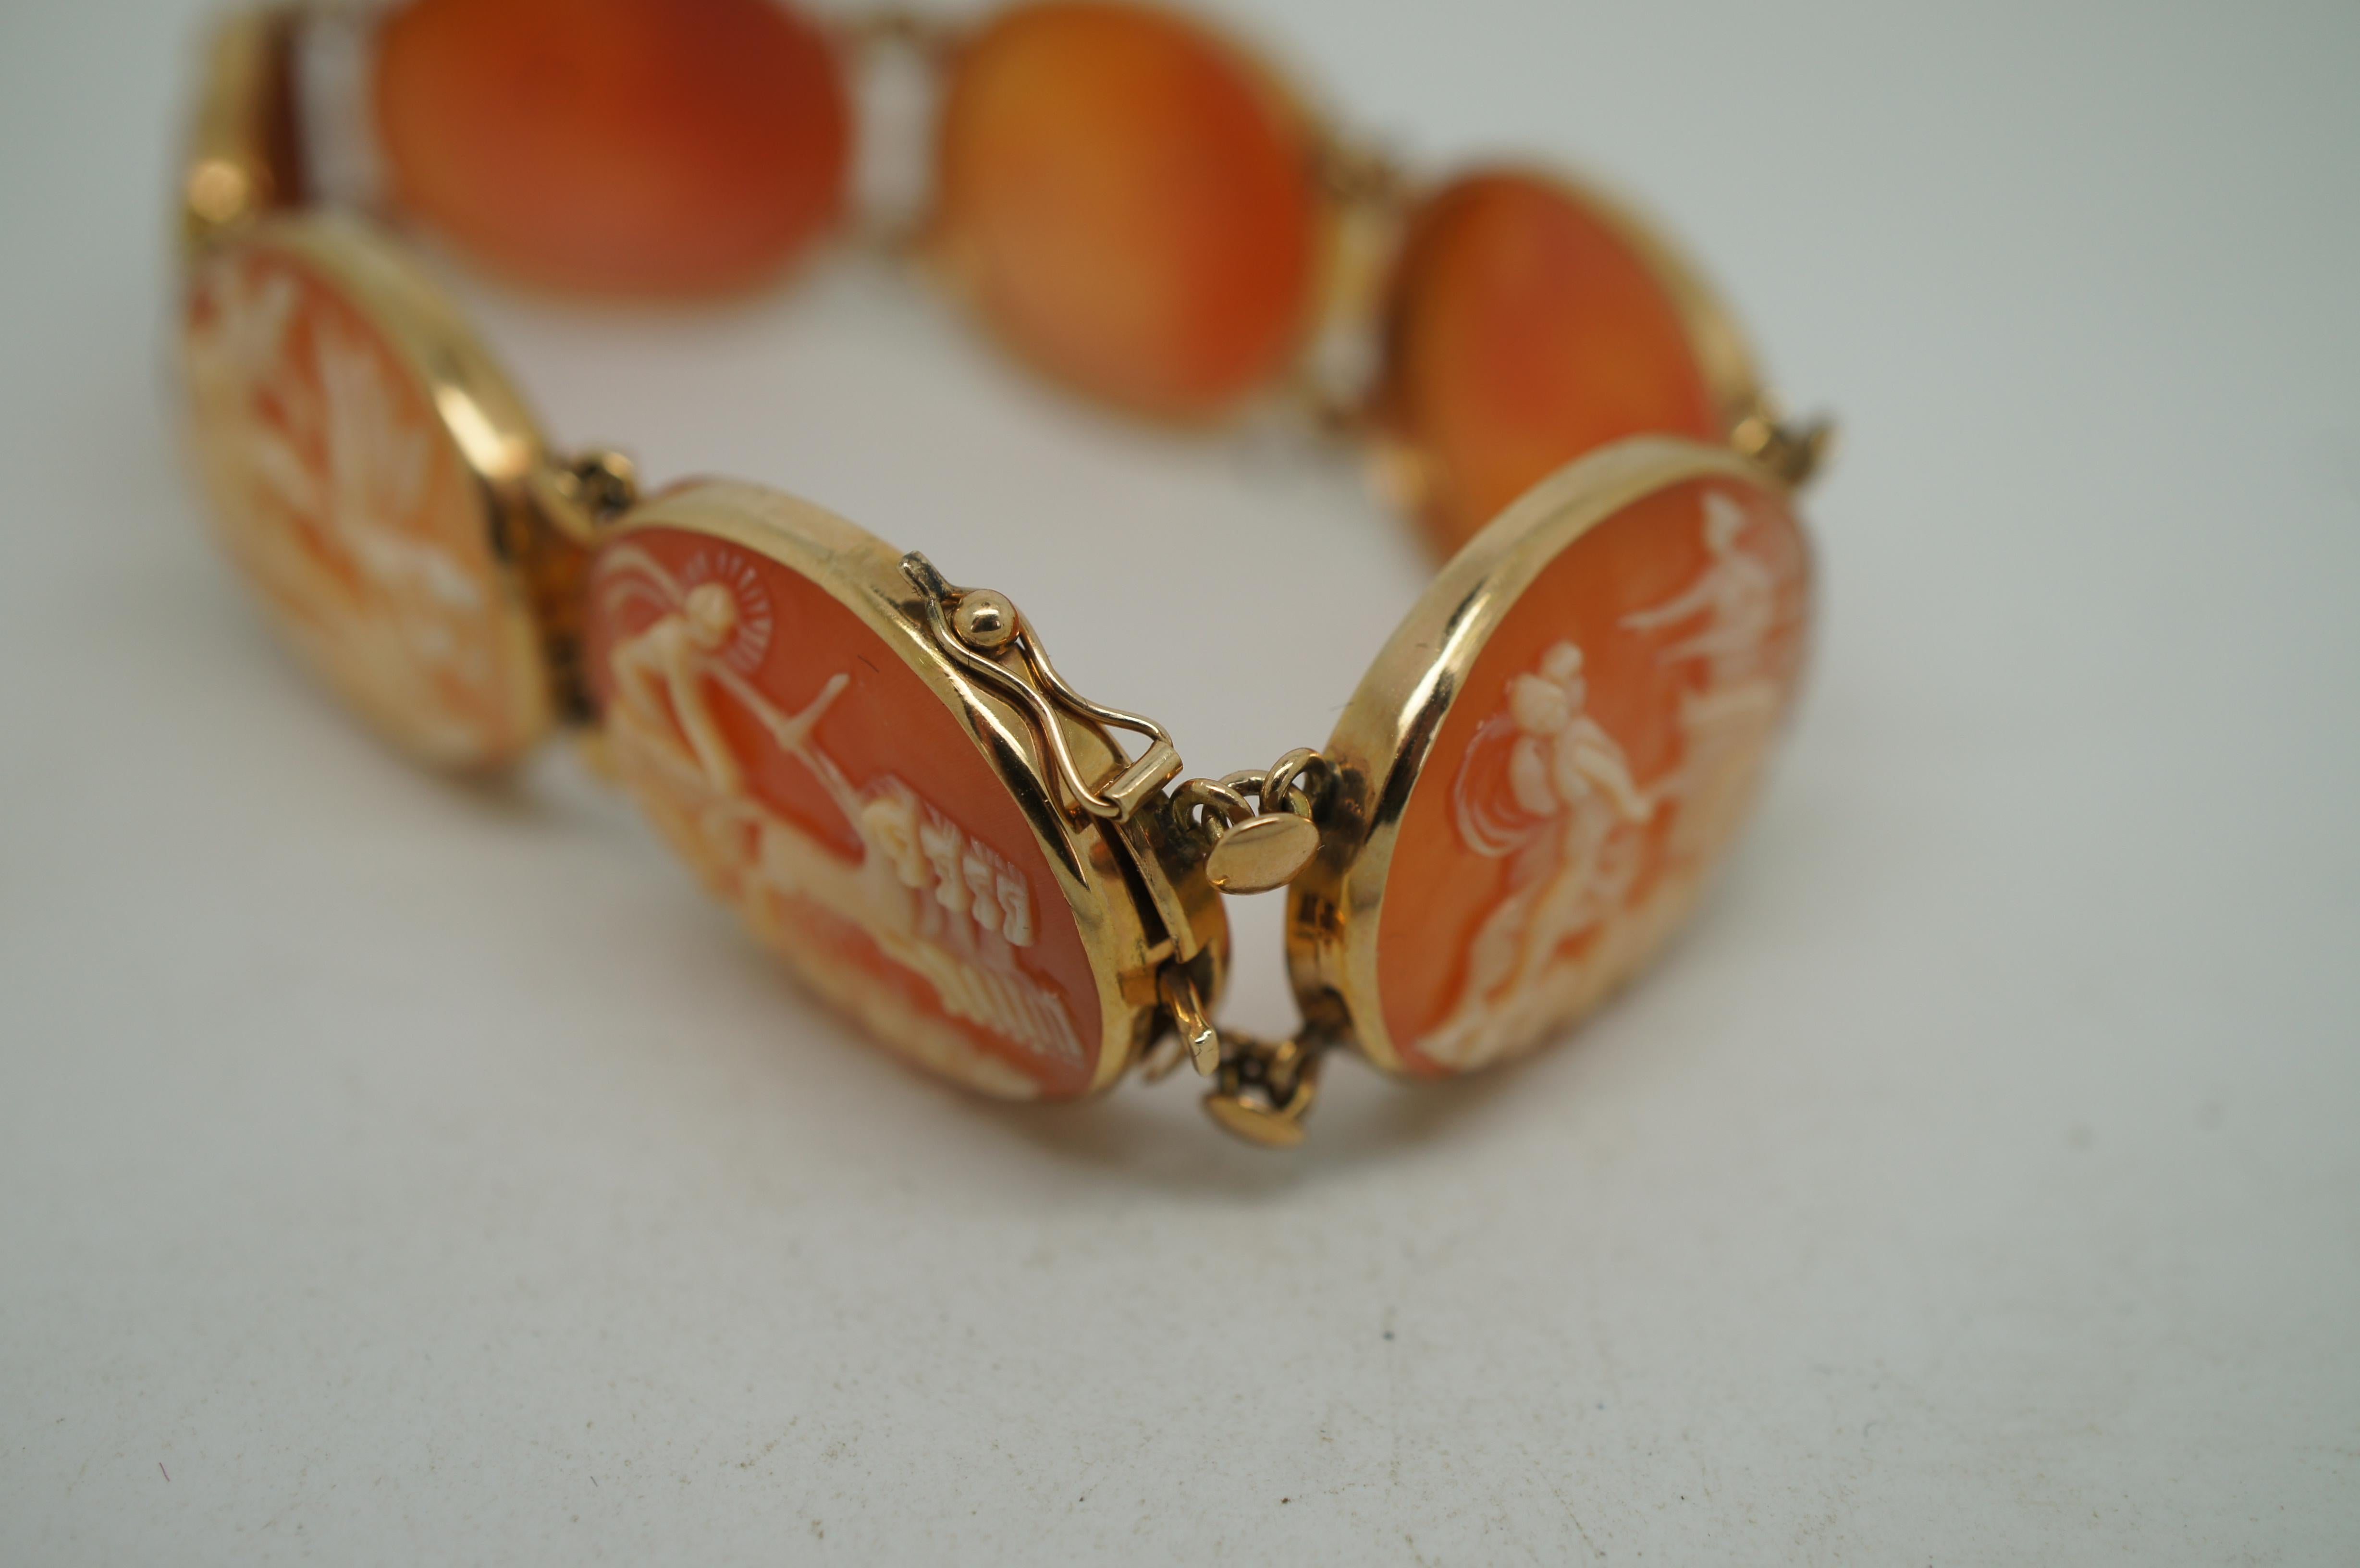 Vintage 14K Gold Neoclassical Cameo Shell Bracelet Roman Chariots Gods 7.5 In Good Condition For Sale In Dayton, OH